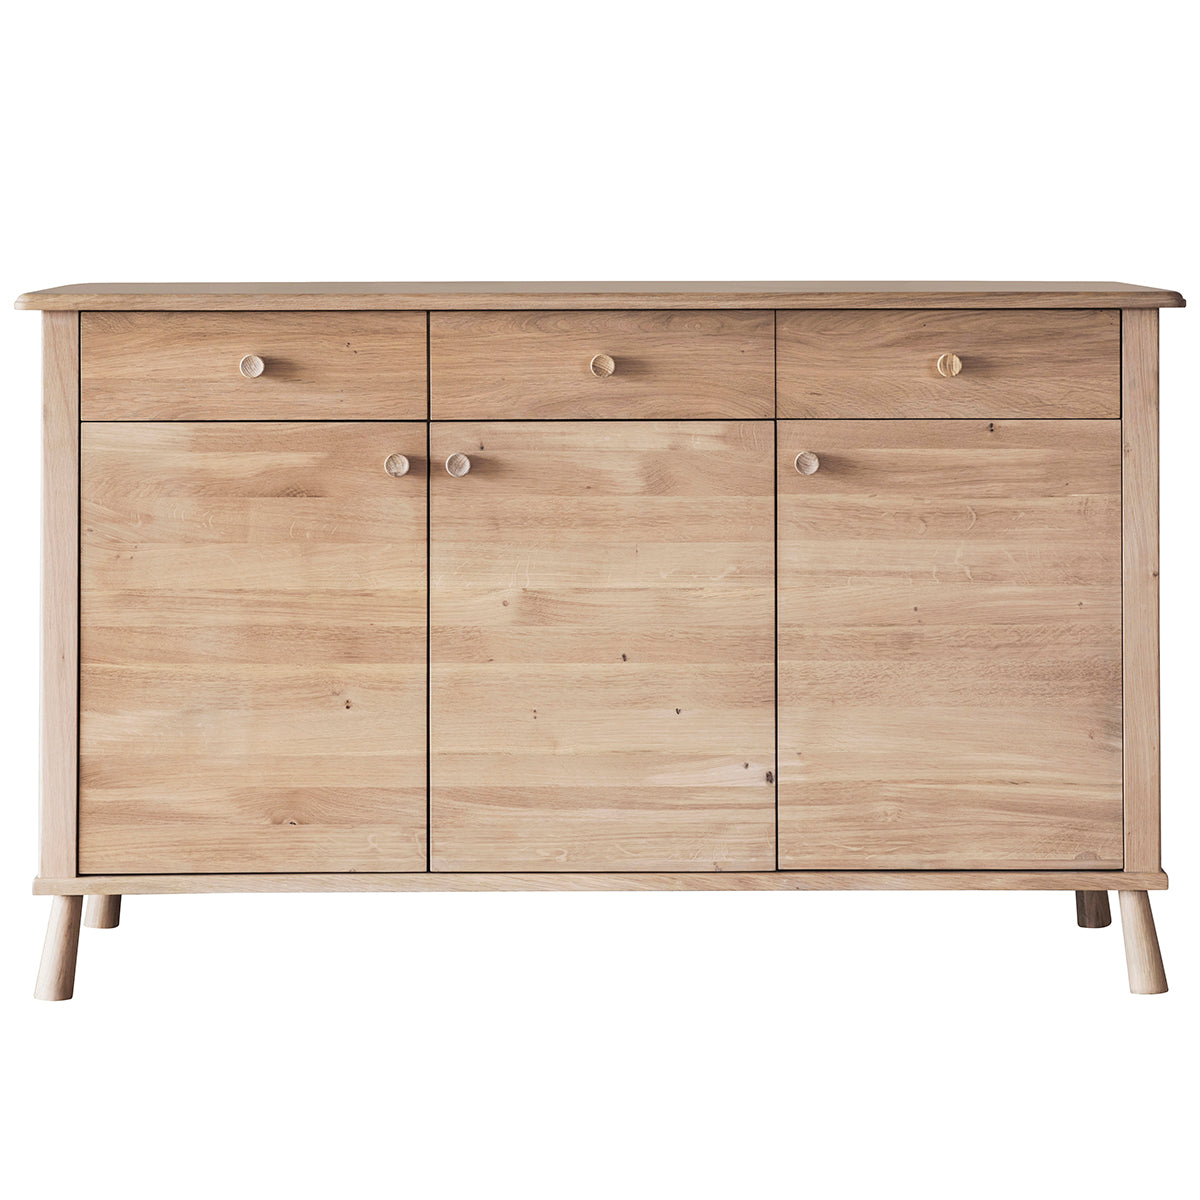 A Tigley 3 Door 3 Drawer Sideboard from Kikiathome.co.uk for home interior decor.